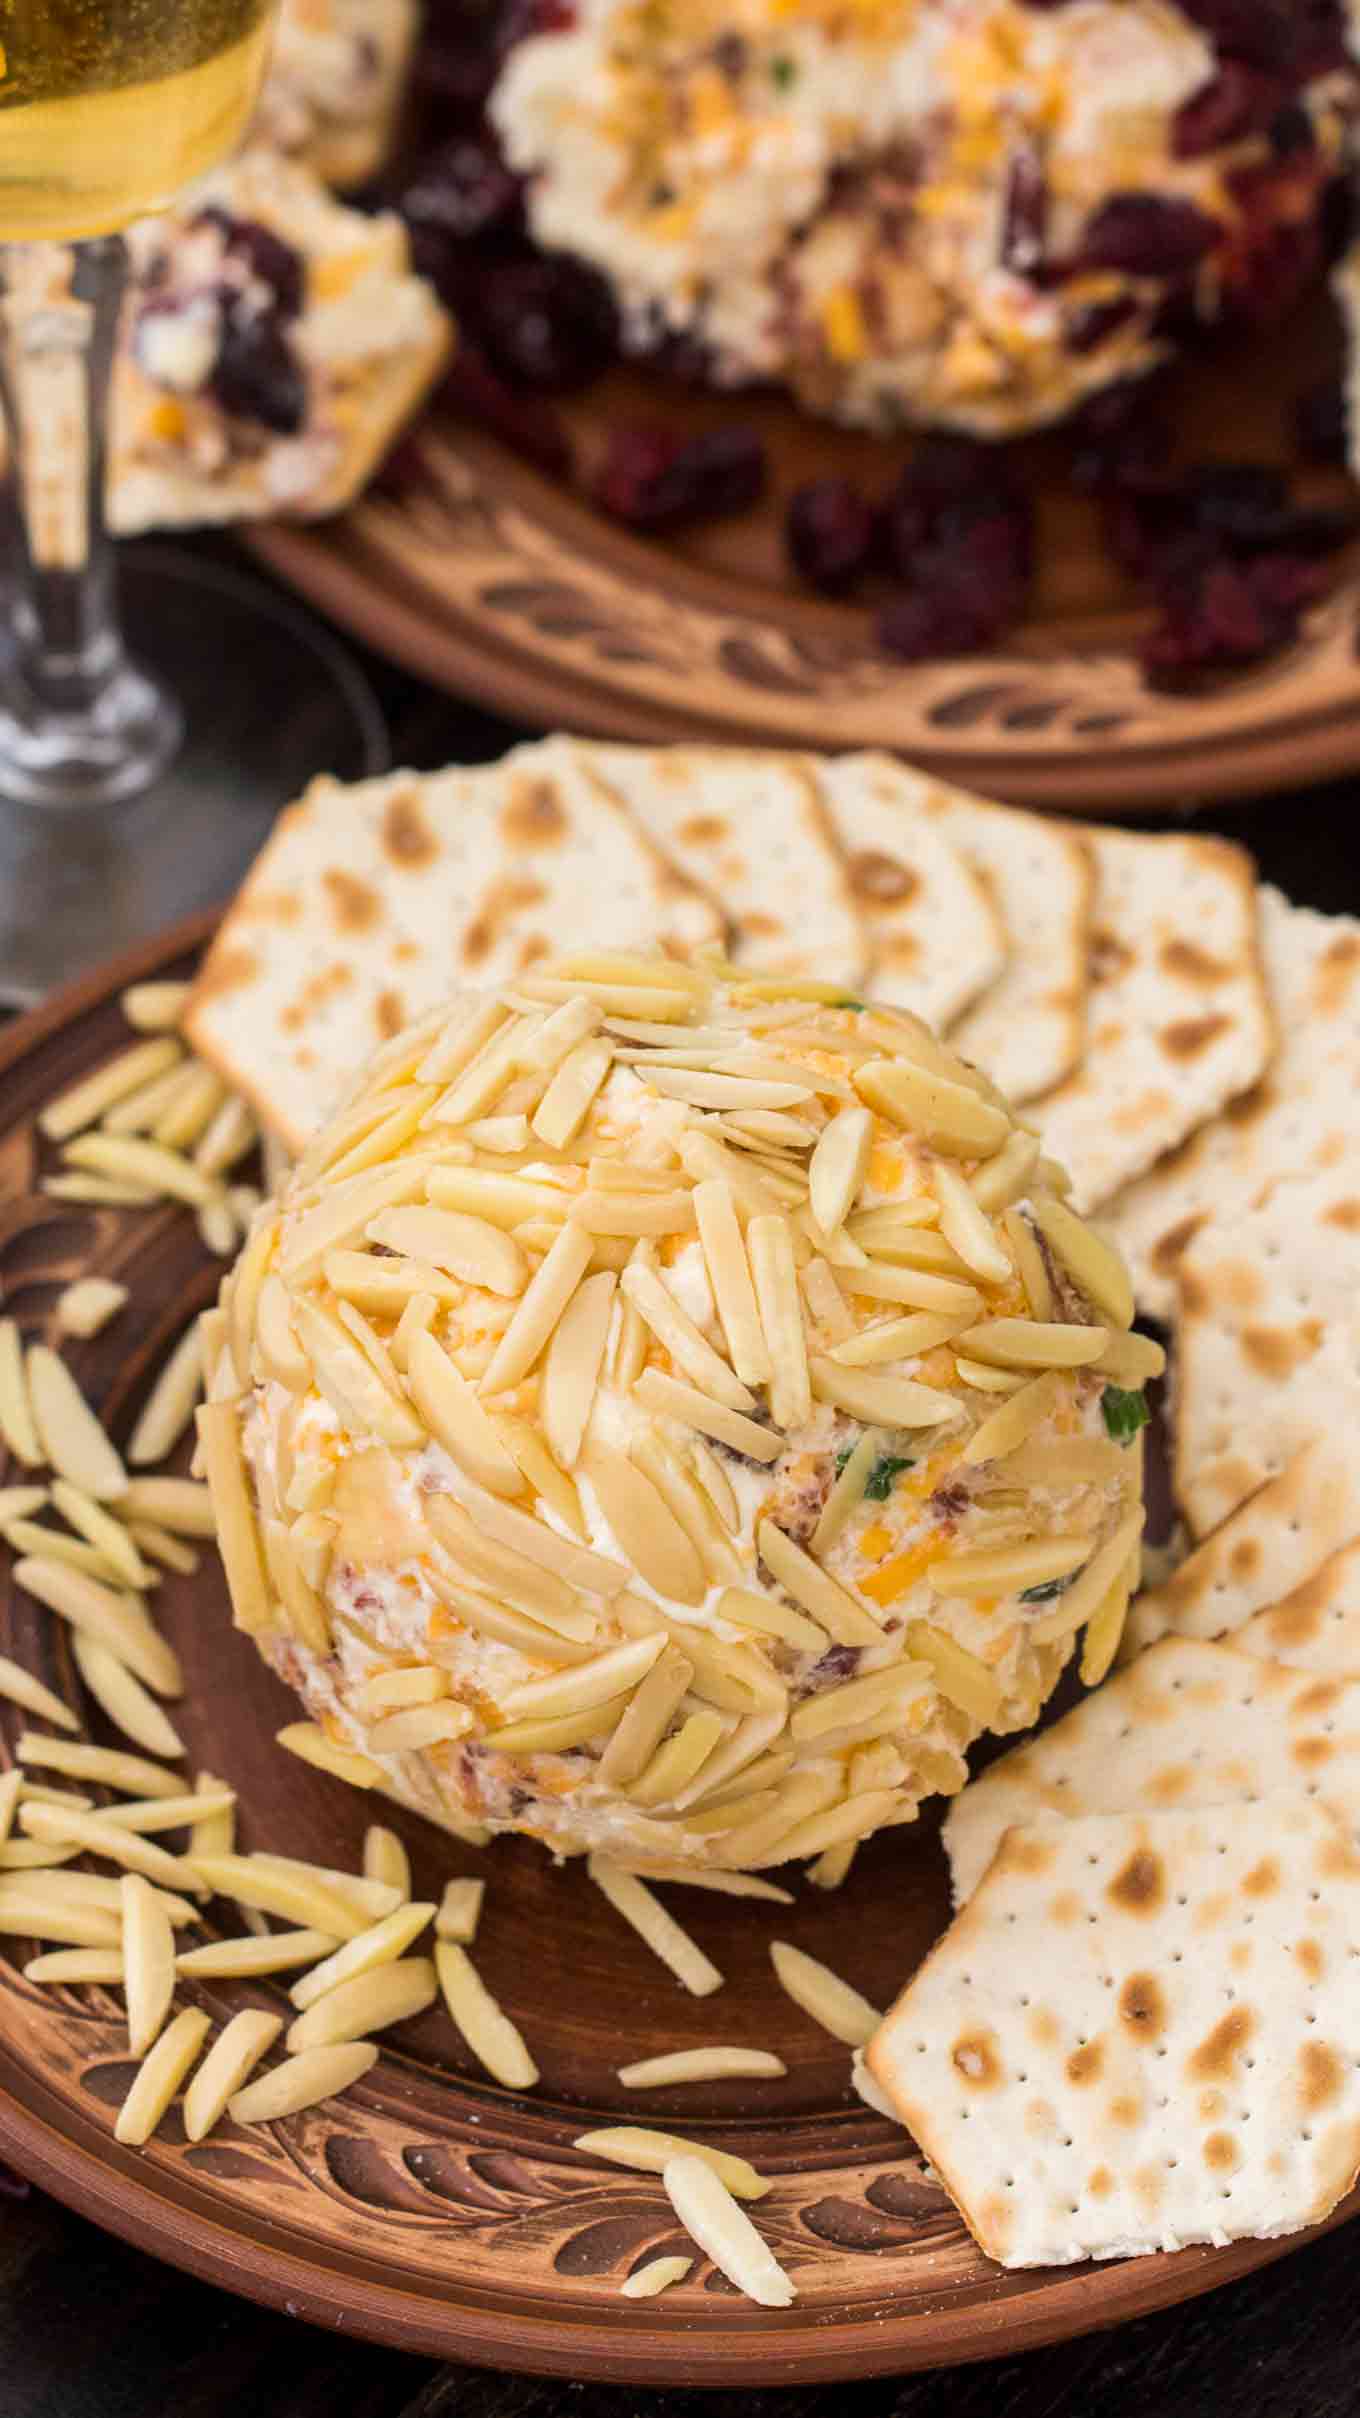 Easy Cheese Ball made with creamy goat cheese, crispy bacon crumbs, fresh green onions, sharp cheddar cheese and covered in sweet dried cranberries.